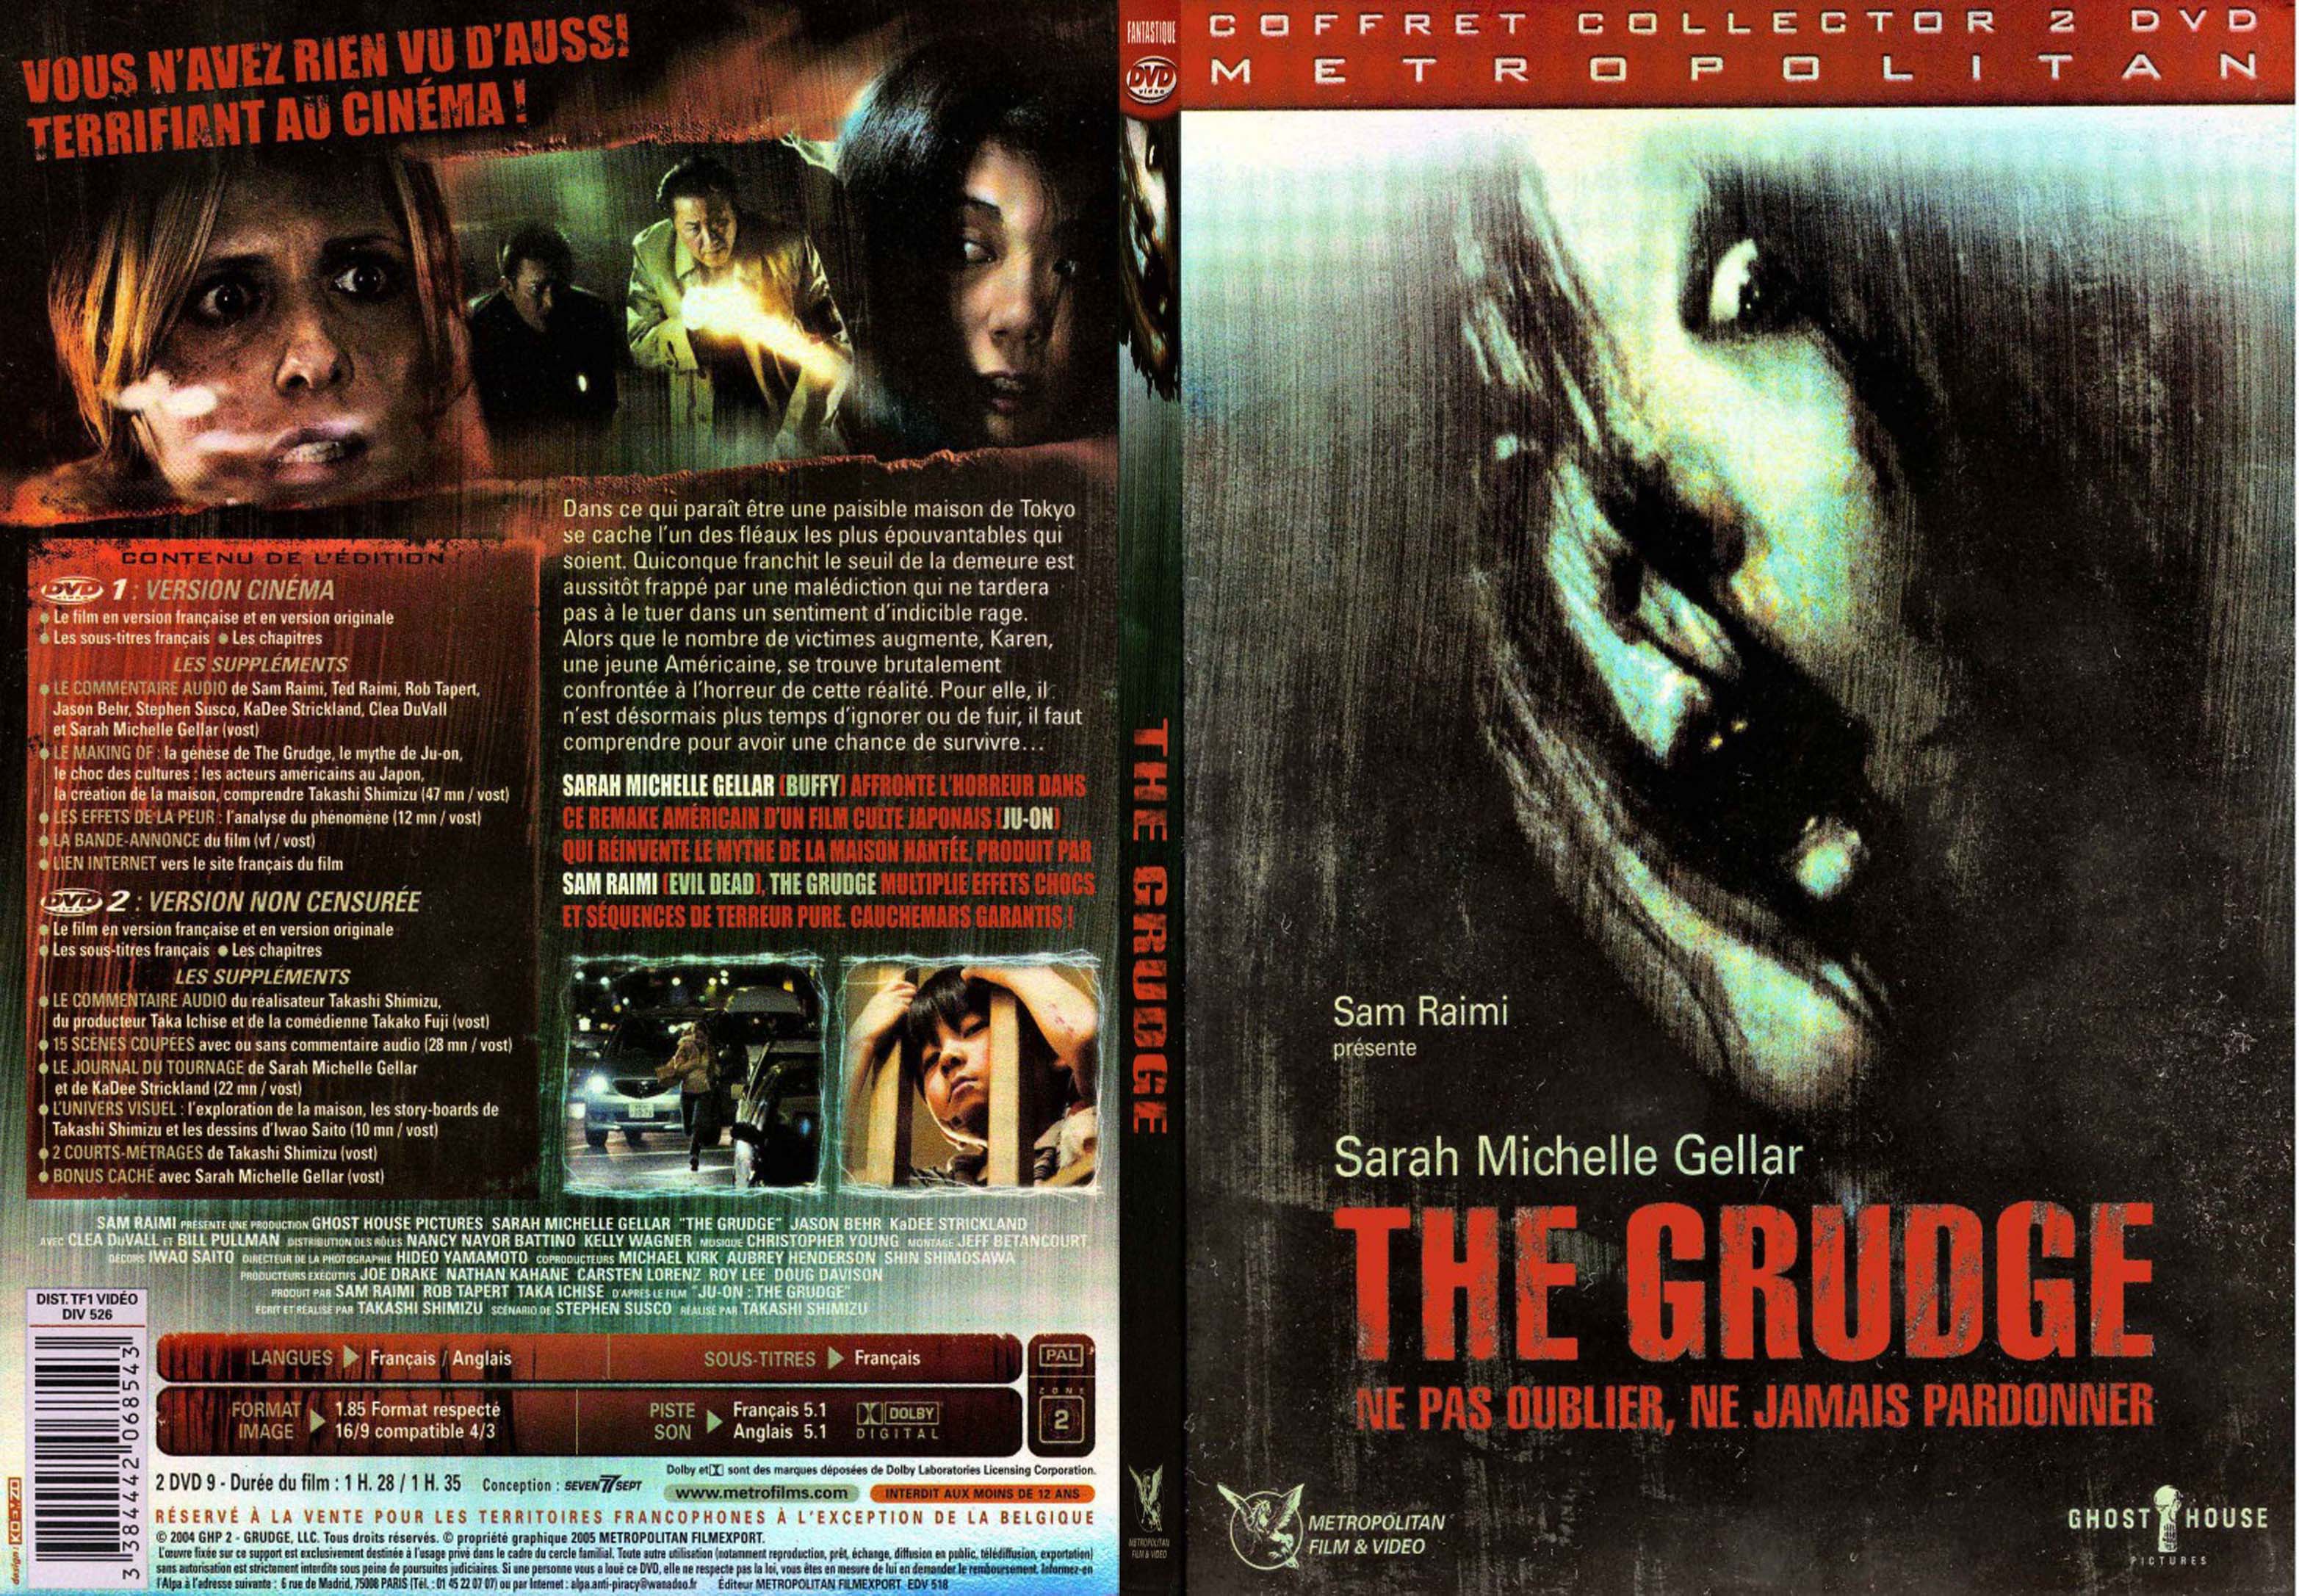 Jaquette DVD The Grudge - SLIM